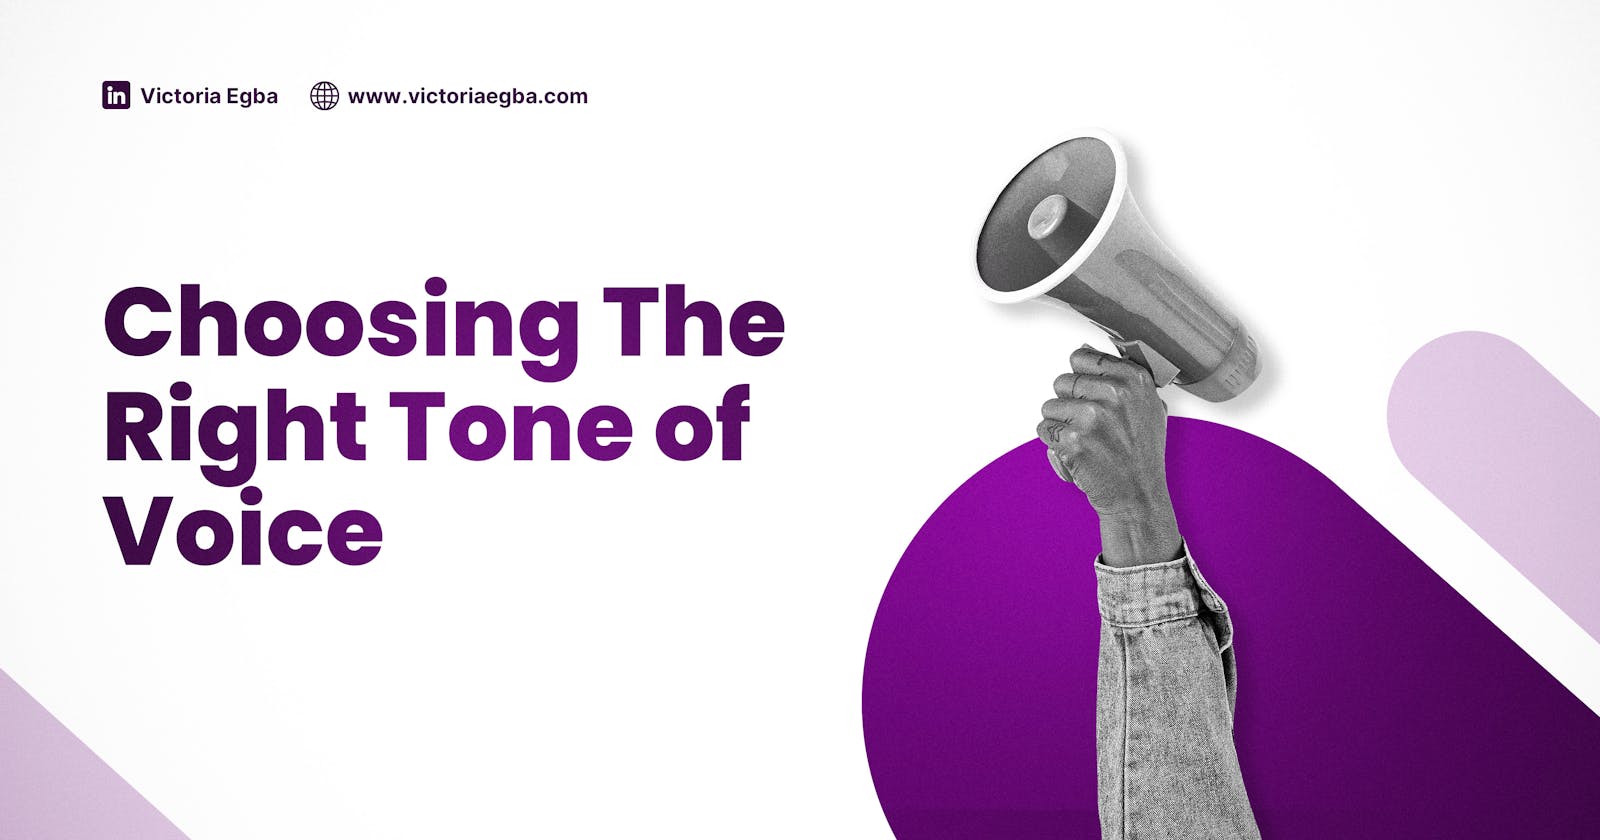 Choosing the Right Tone of Voice For a Brand